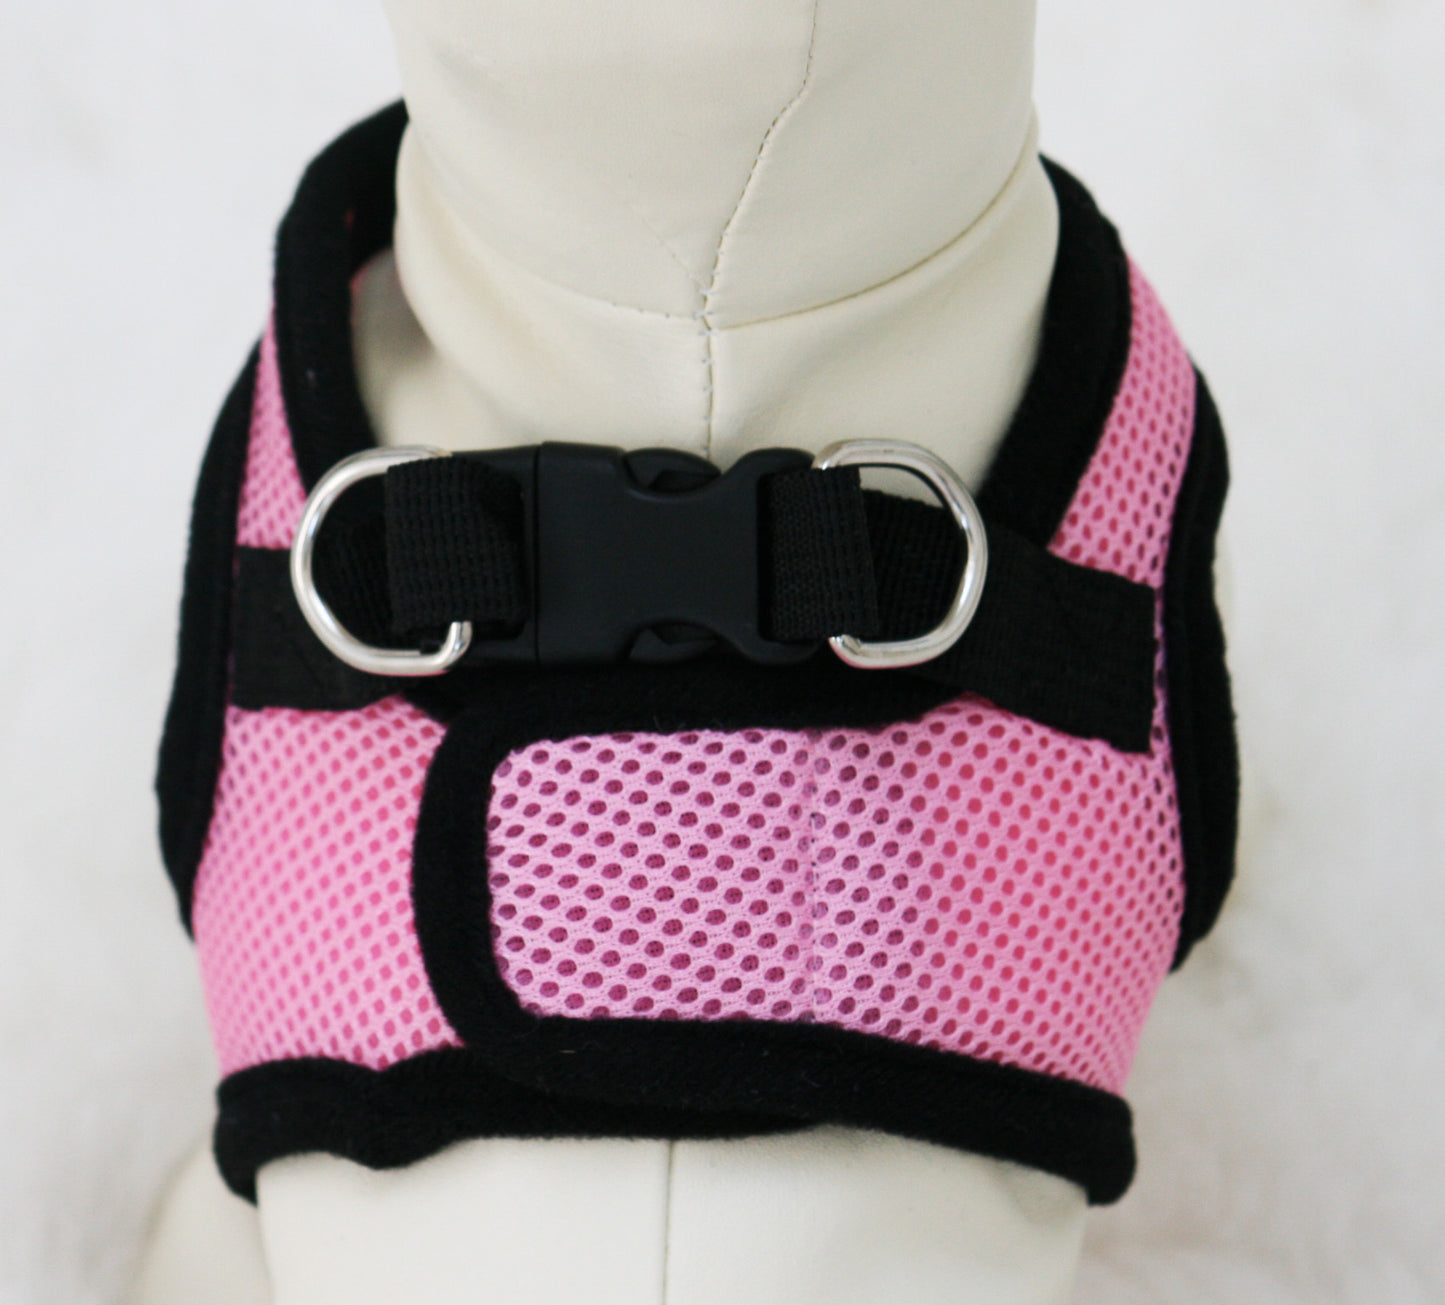 Pink Dog Harness with colorful bow and a black leash, colorful bow tie , Wedding dog collar